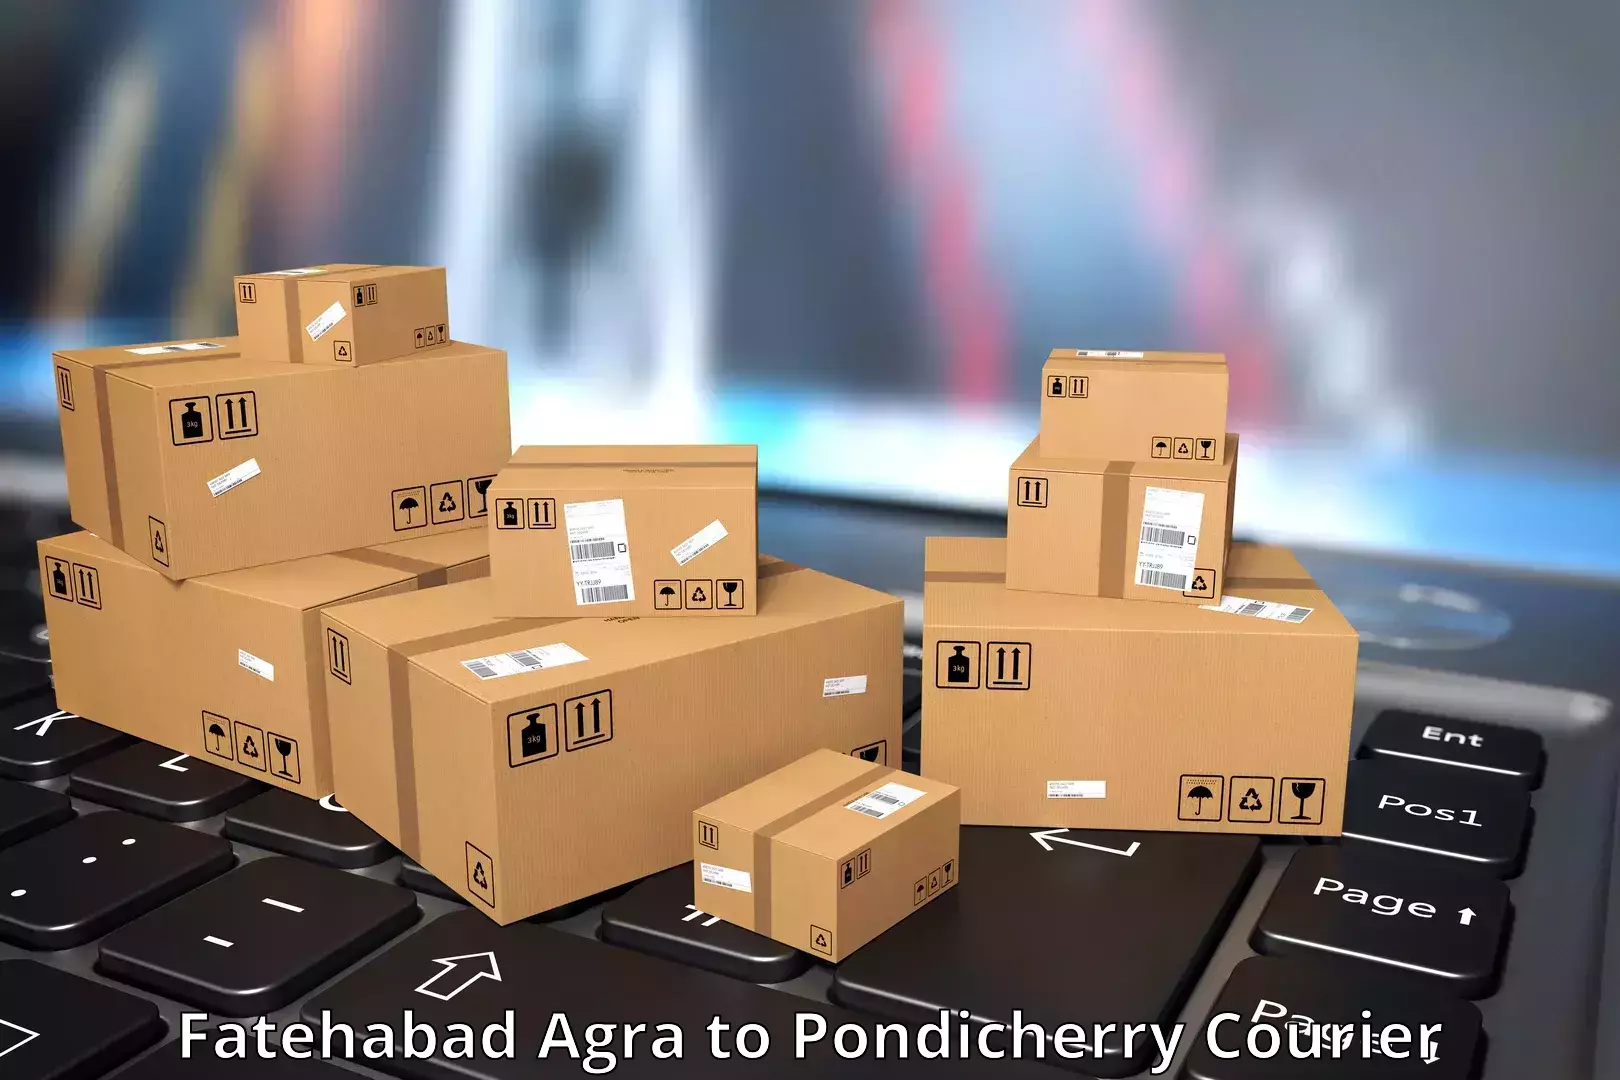 Next-day delivery options Fatehabad Agra to Pondicherry